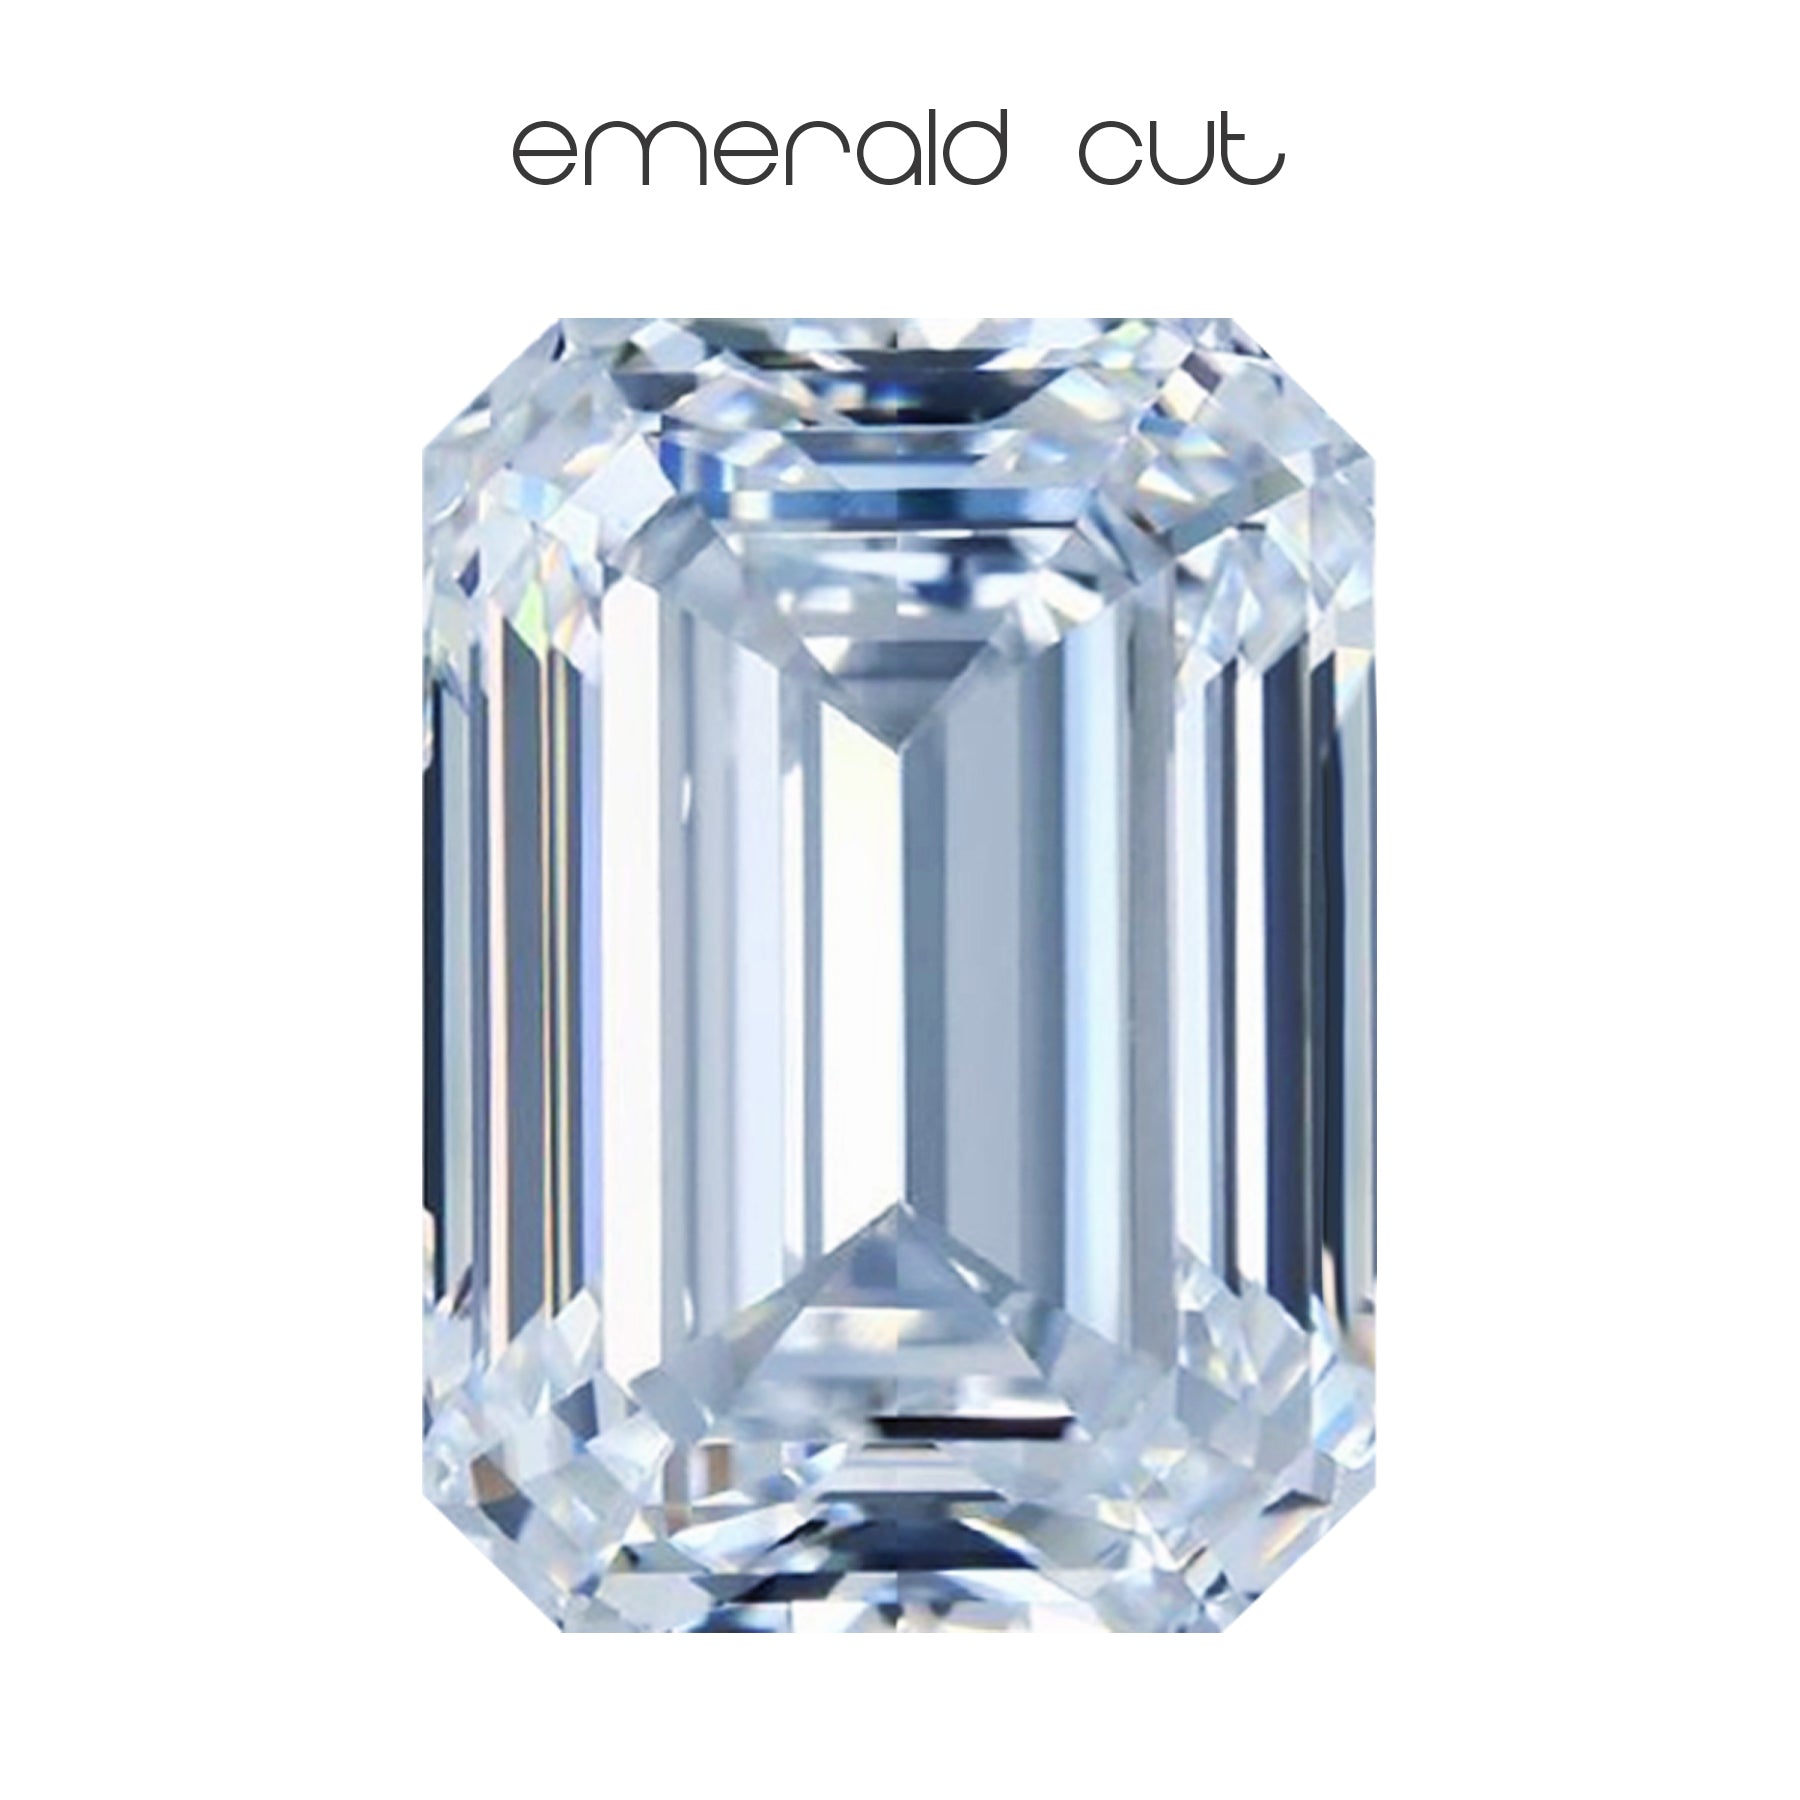 the history and meaning of the emerald cut